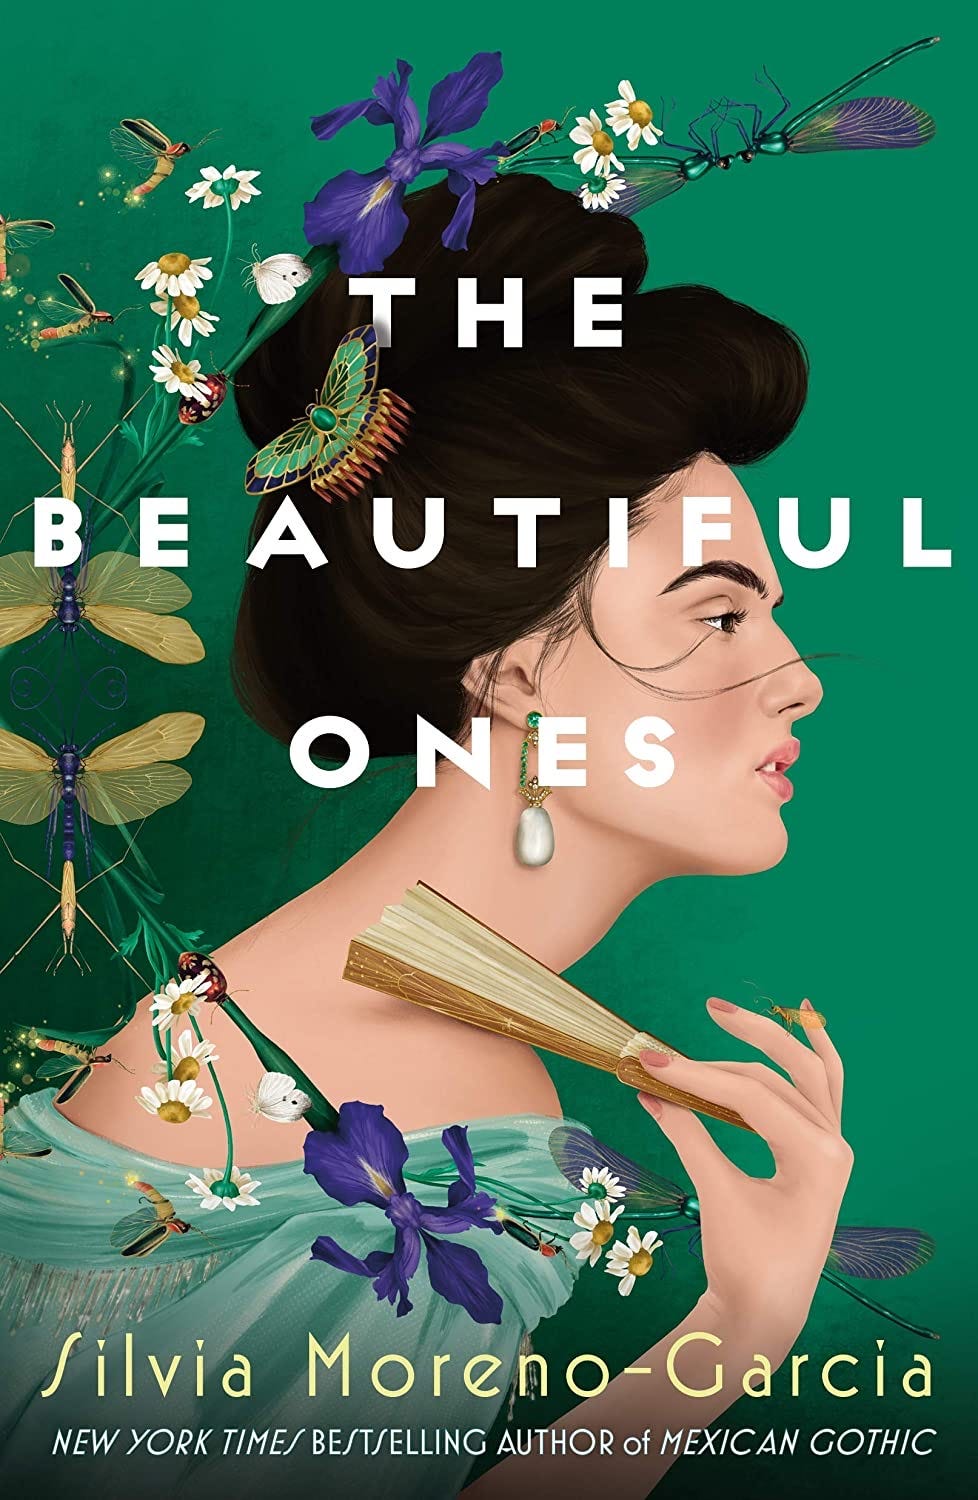 Alt text: Cover of The Beautiful Ones by Silvia Moreno-Garcia